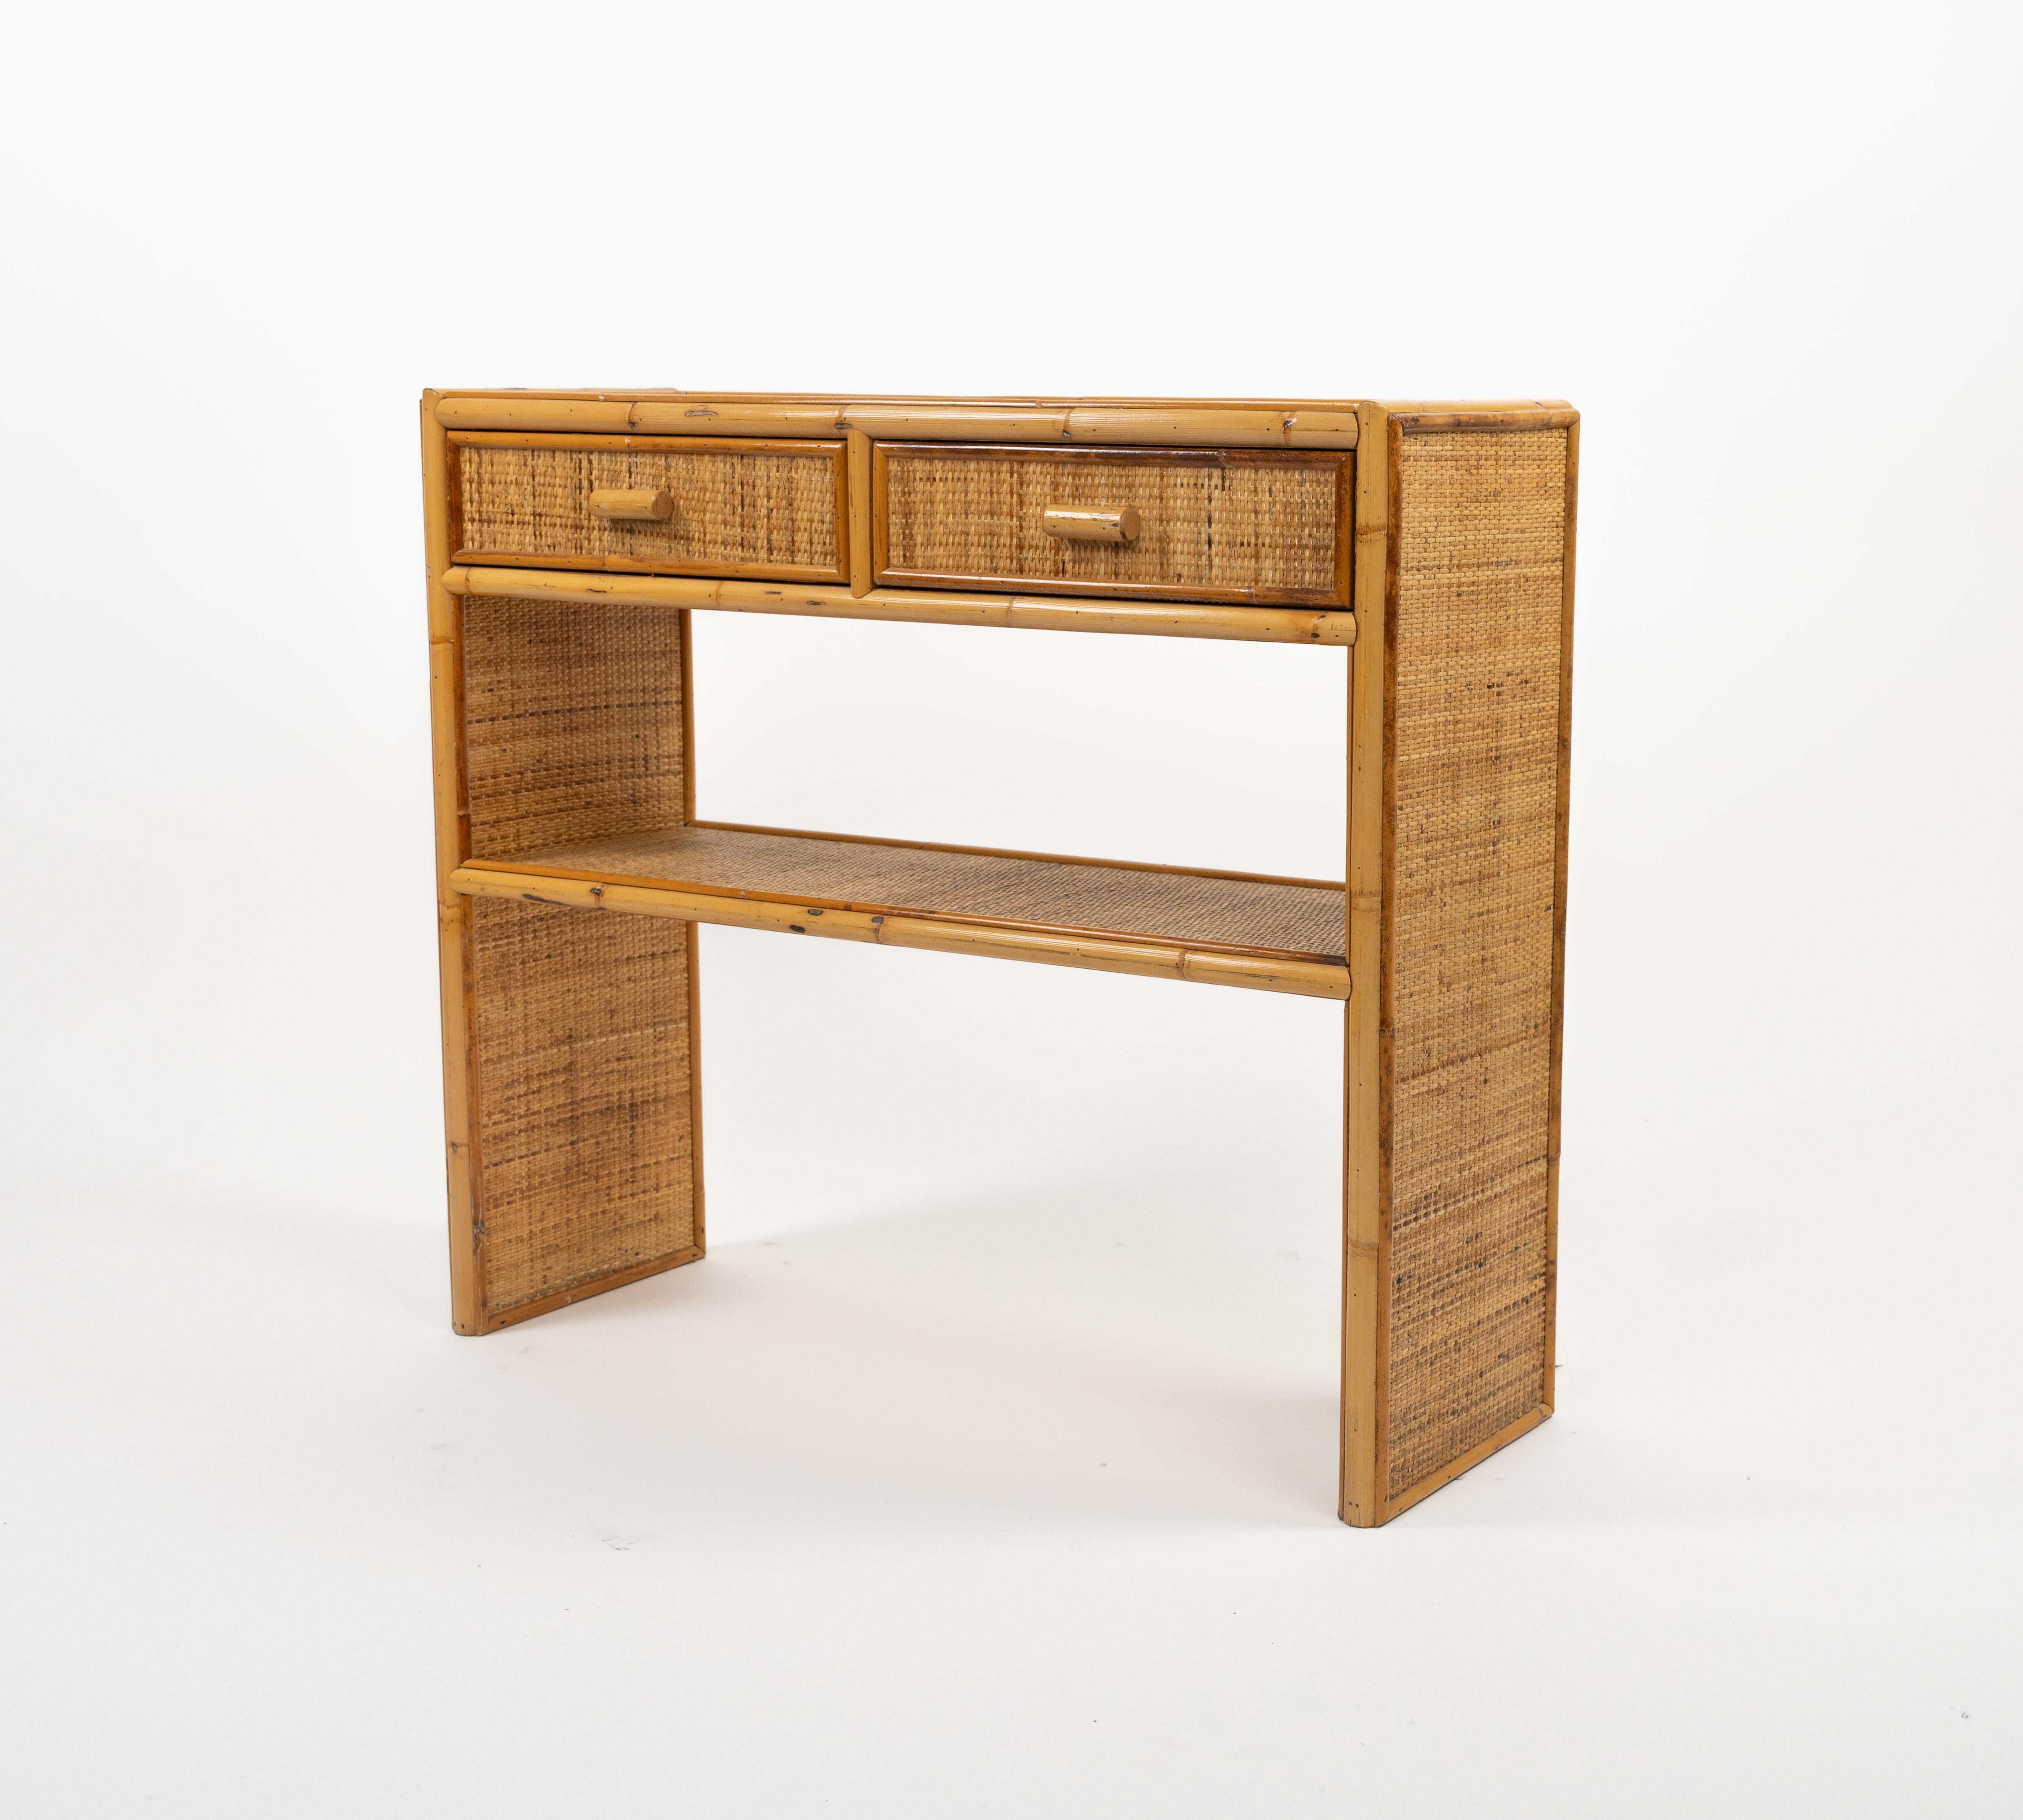 Midcentury Bamboo and Rattan Console Table with Drawers, Italy 1970s For Sale 5